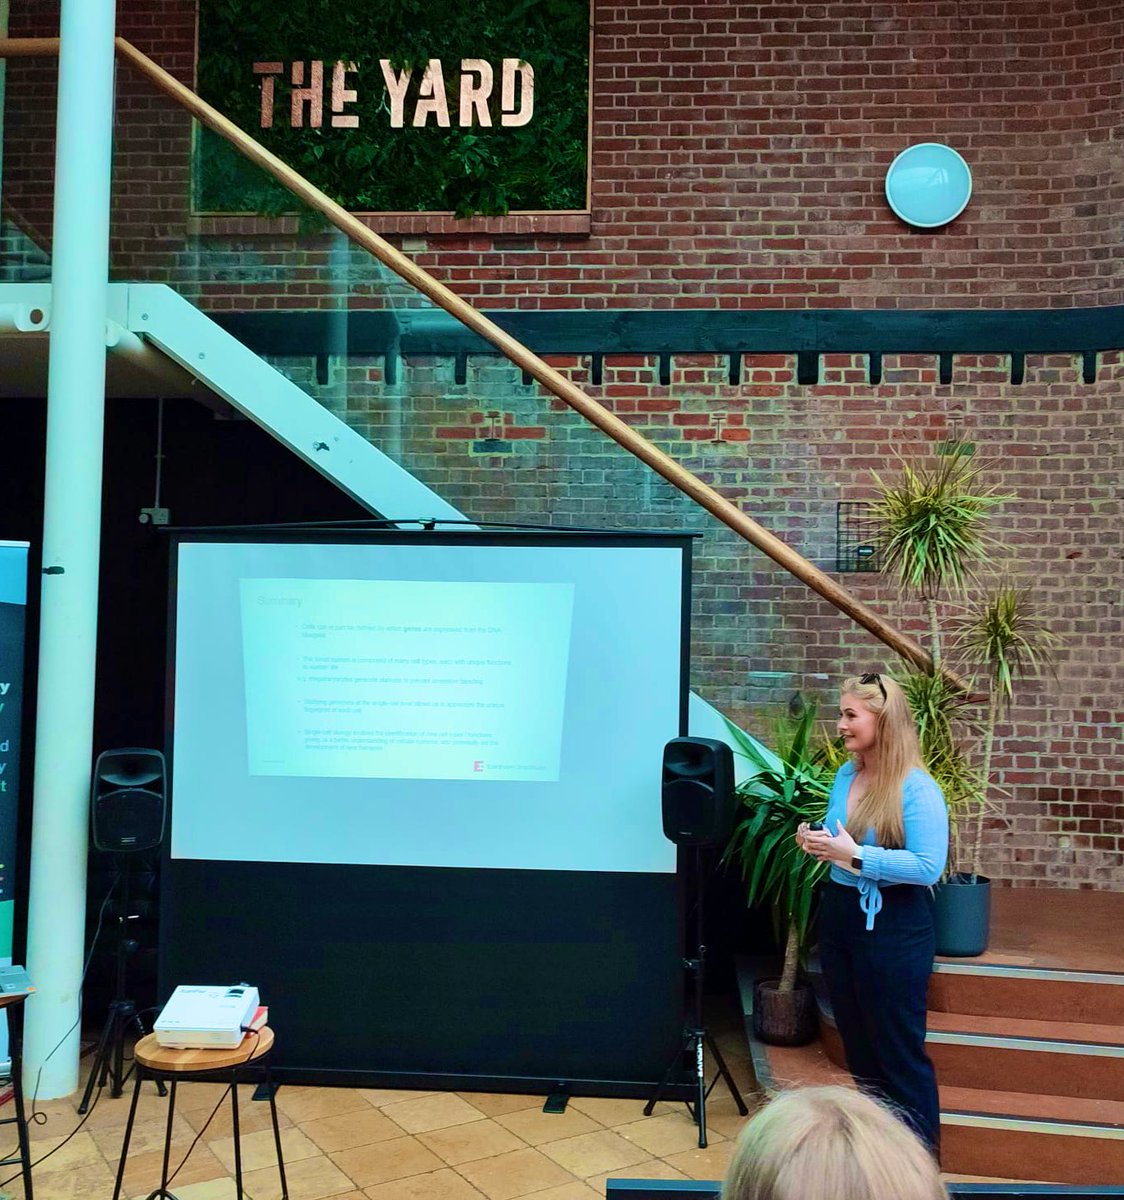 First of hopefully many #pintofscience events! What an engaged audience, I hope everyone walked away knowing more about their blood system than when they arrived, and learned about the importance of single cell research 🧬👩🏼‍🔬 can't wait for the next 2 science packed days! #pint24